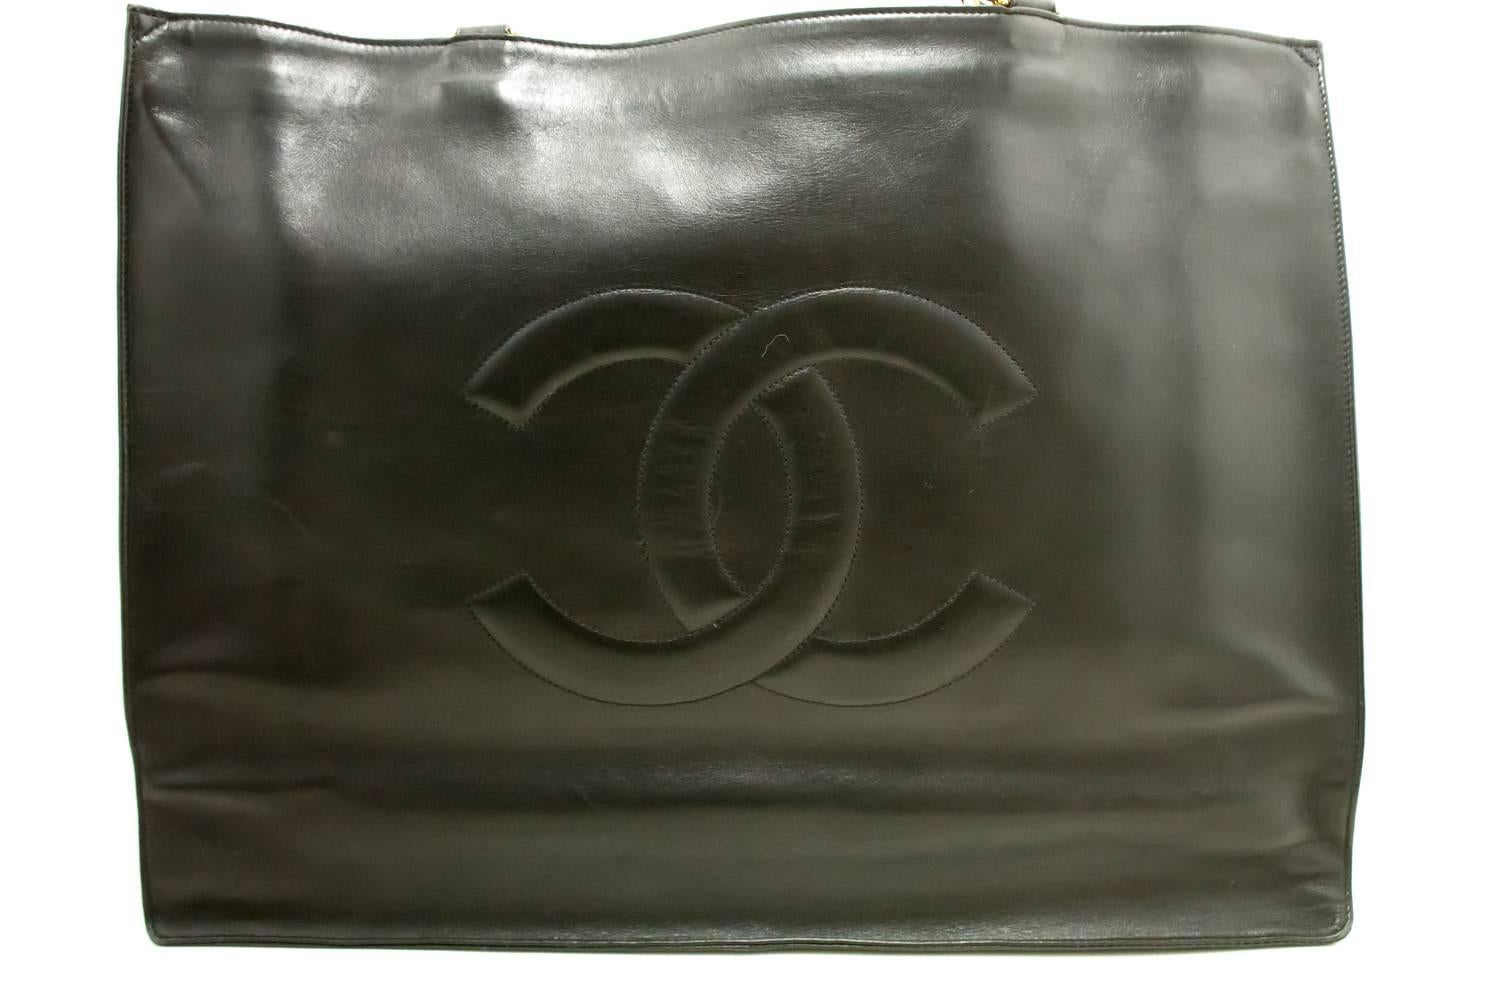 Condition & Ratings
Bag Overall: 8 of 10
 The outside is in excellent condition with slight scuff marks on the edges and slight scratches. The inside is also excellent and very clean. All chains and hardware are shiny and excellent. Highly